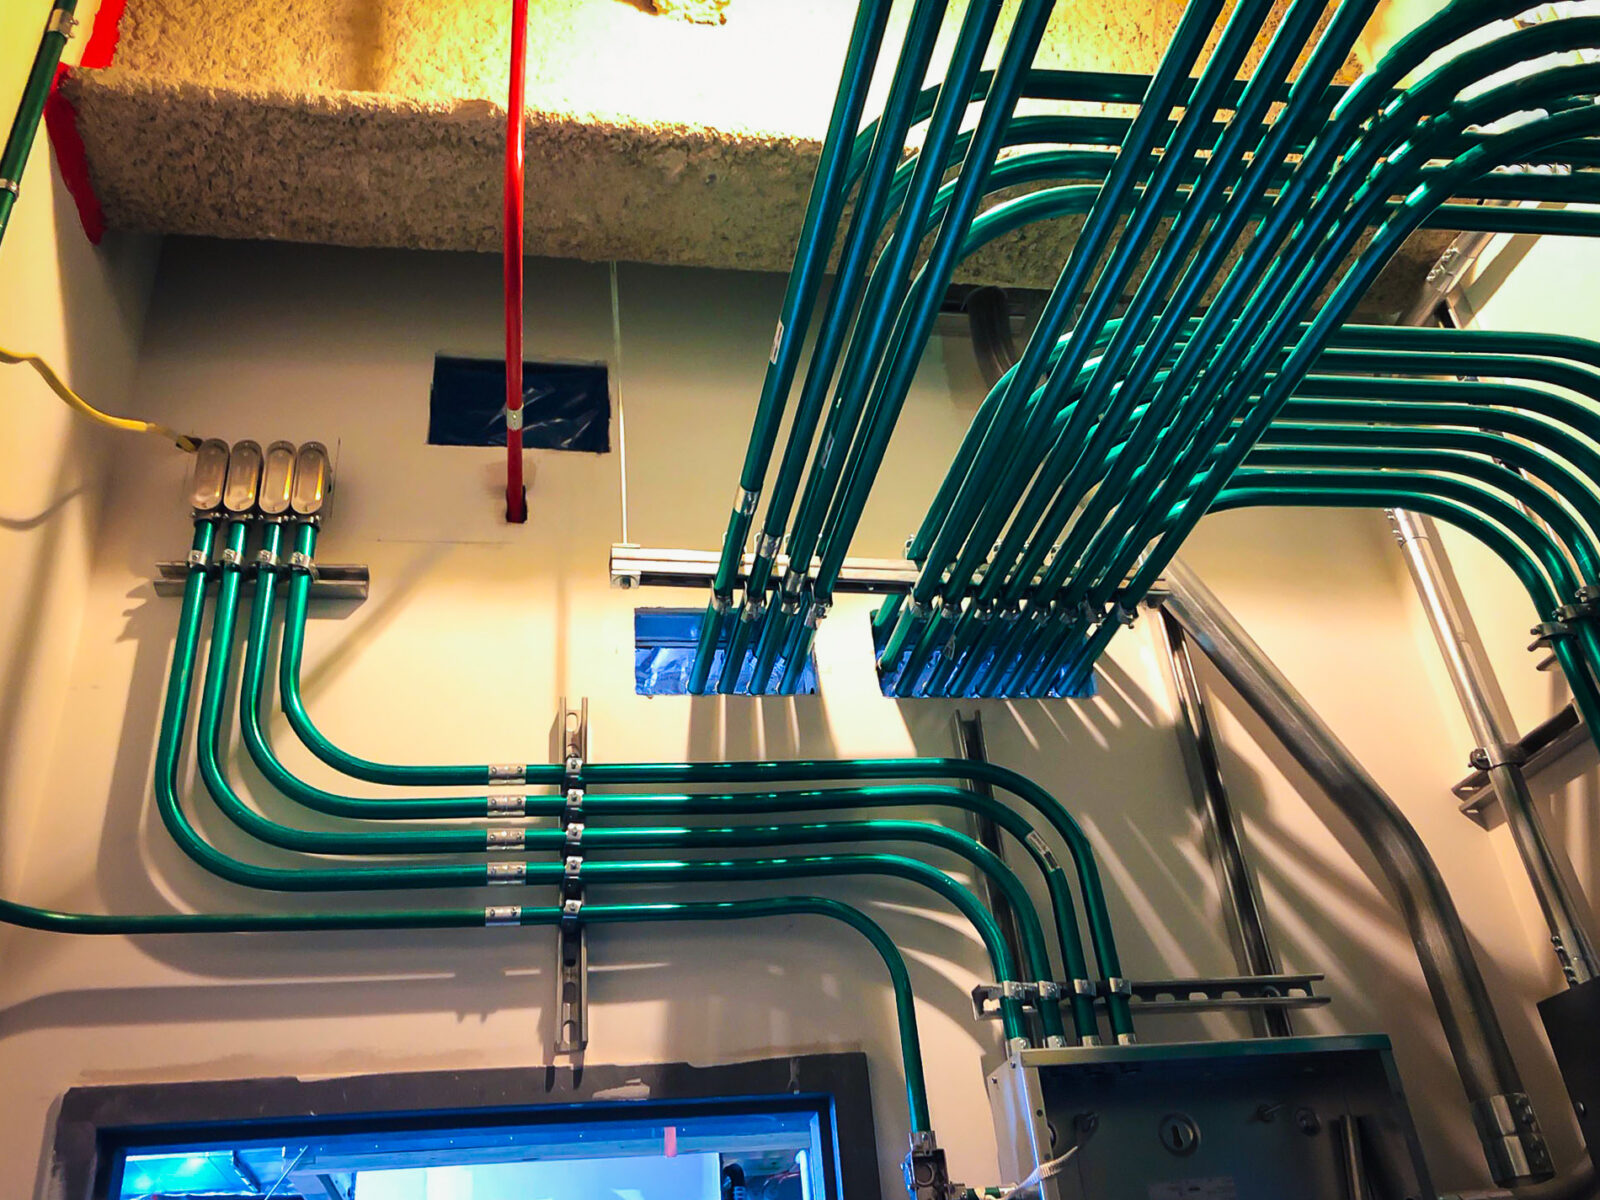 Green electrical conduit mounted to the wall